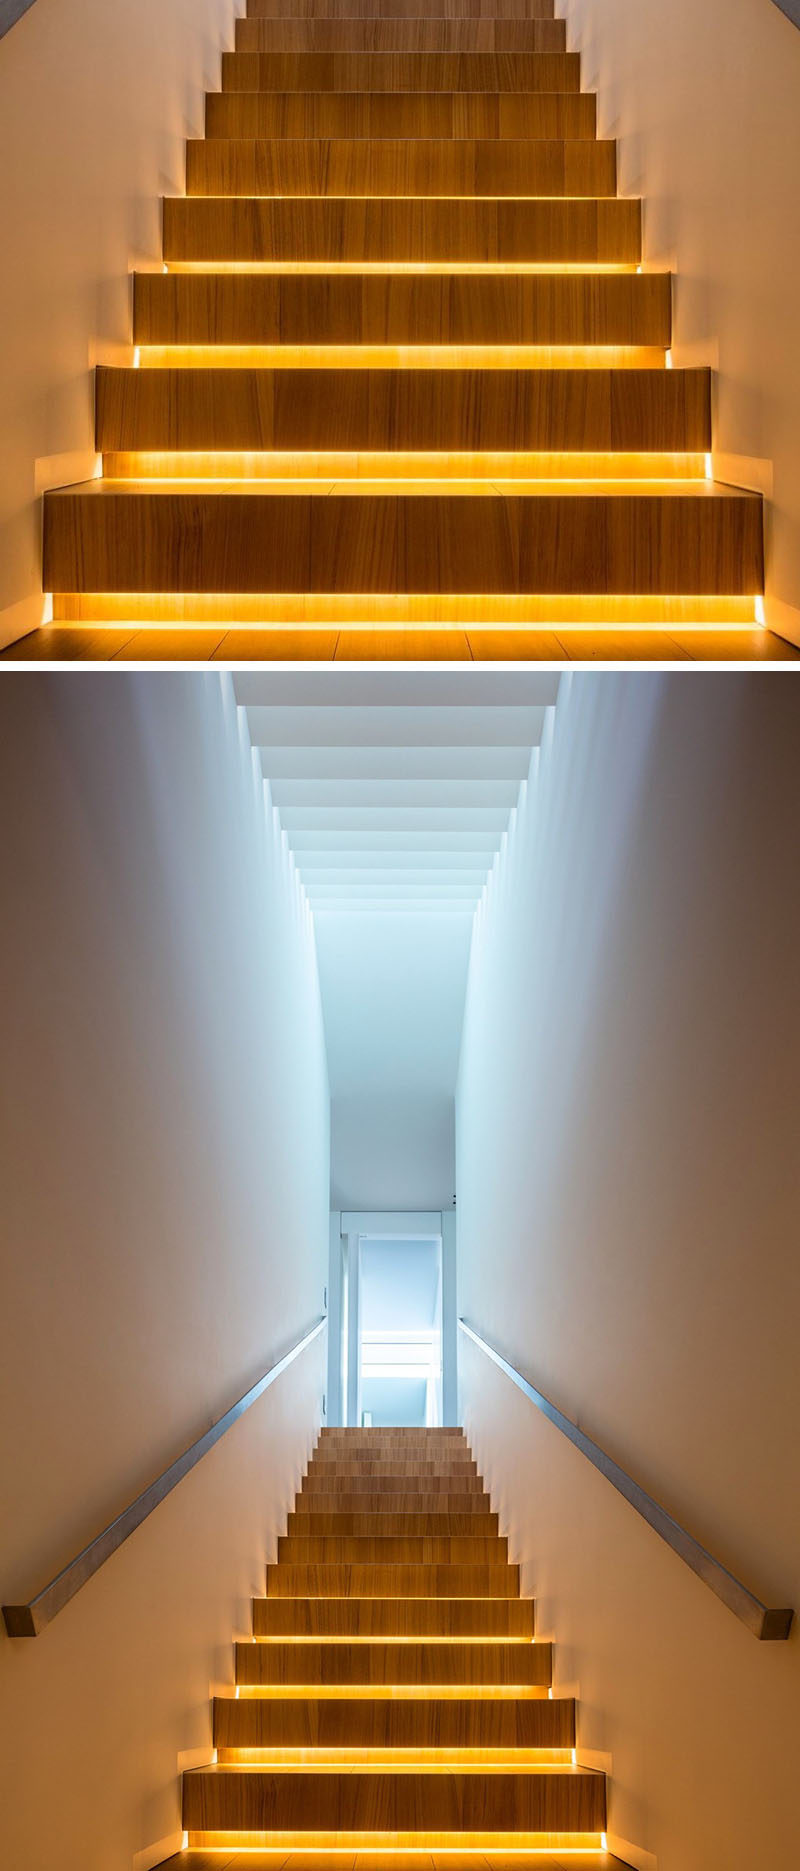 18 Examples Of Stair Details To Inspire You // These wooden stairs with hidden lighting, light up from underneath to ensure youll never miss a step again.